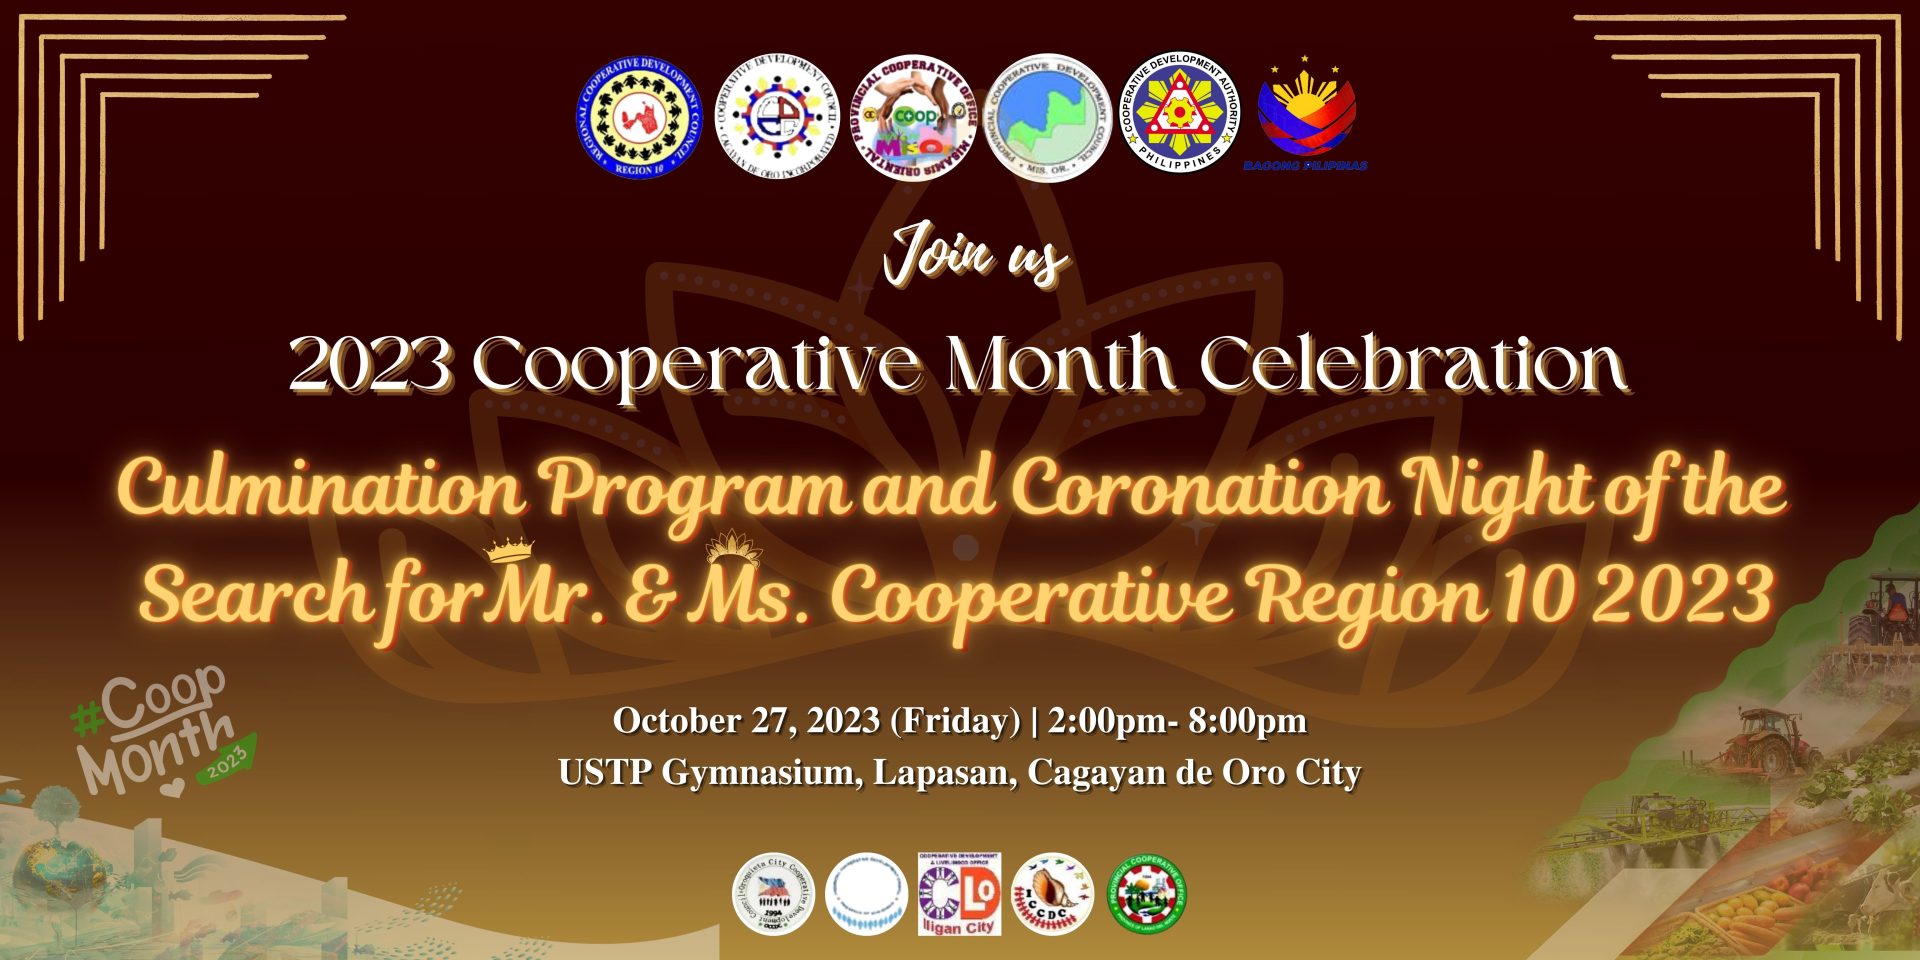 Culmination Program and Coronation Night of the 
Search forMr. & Ms. Cooperative Region 10 2023